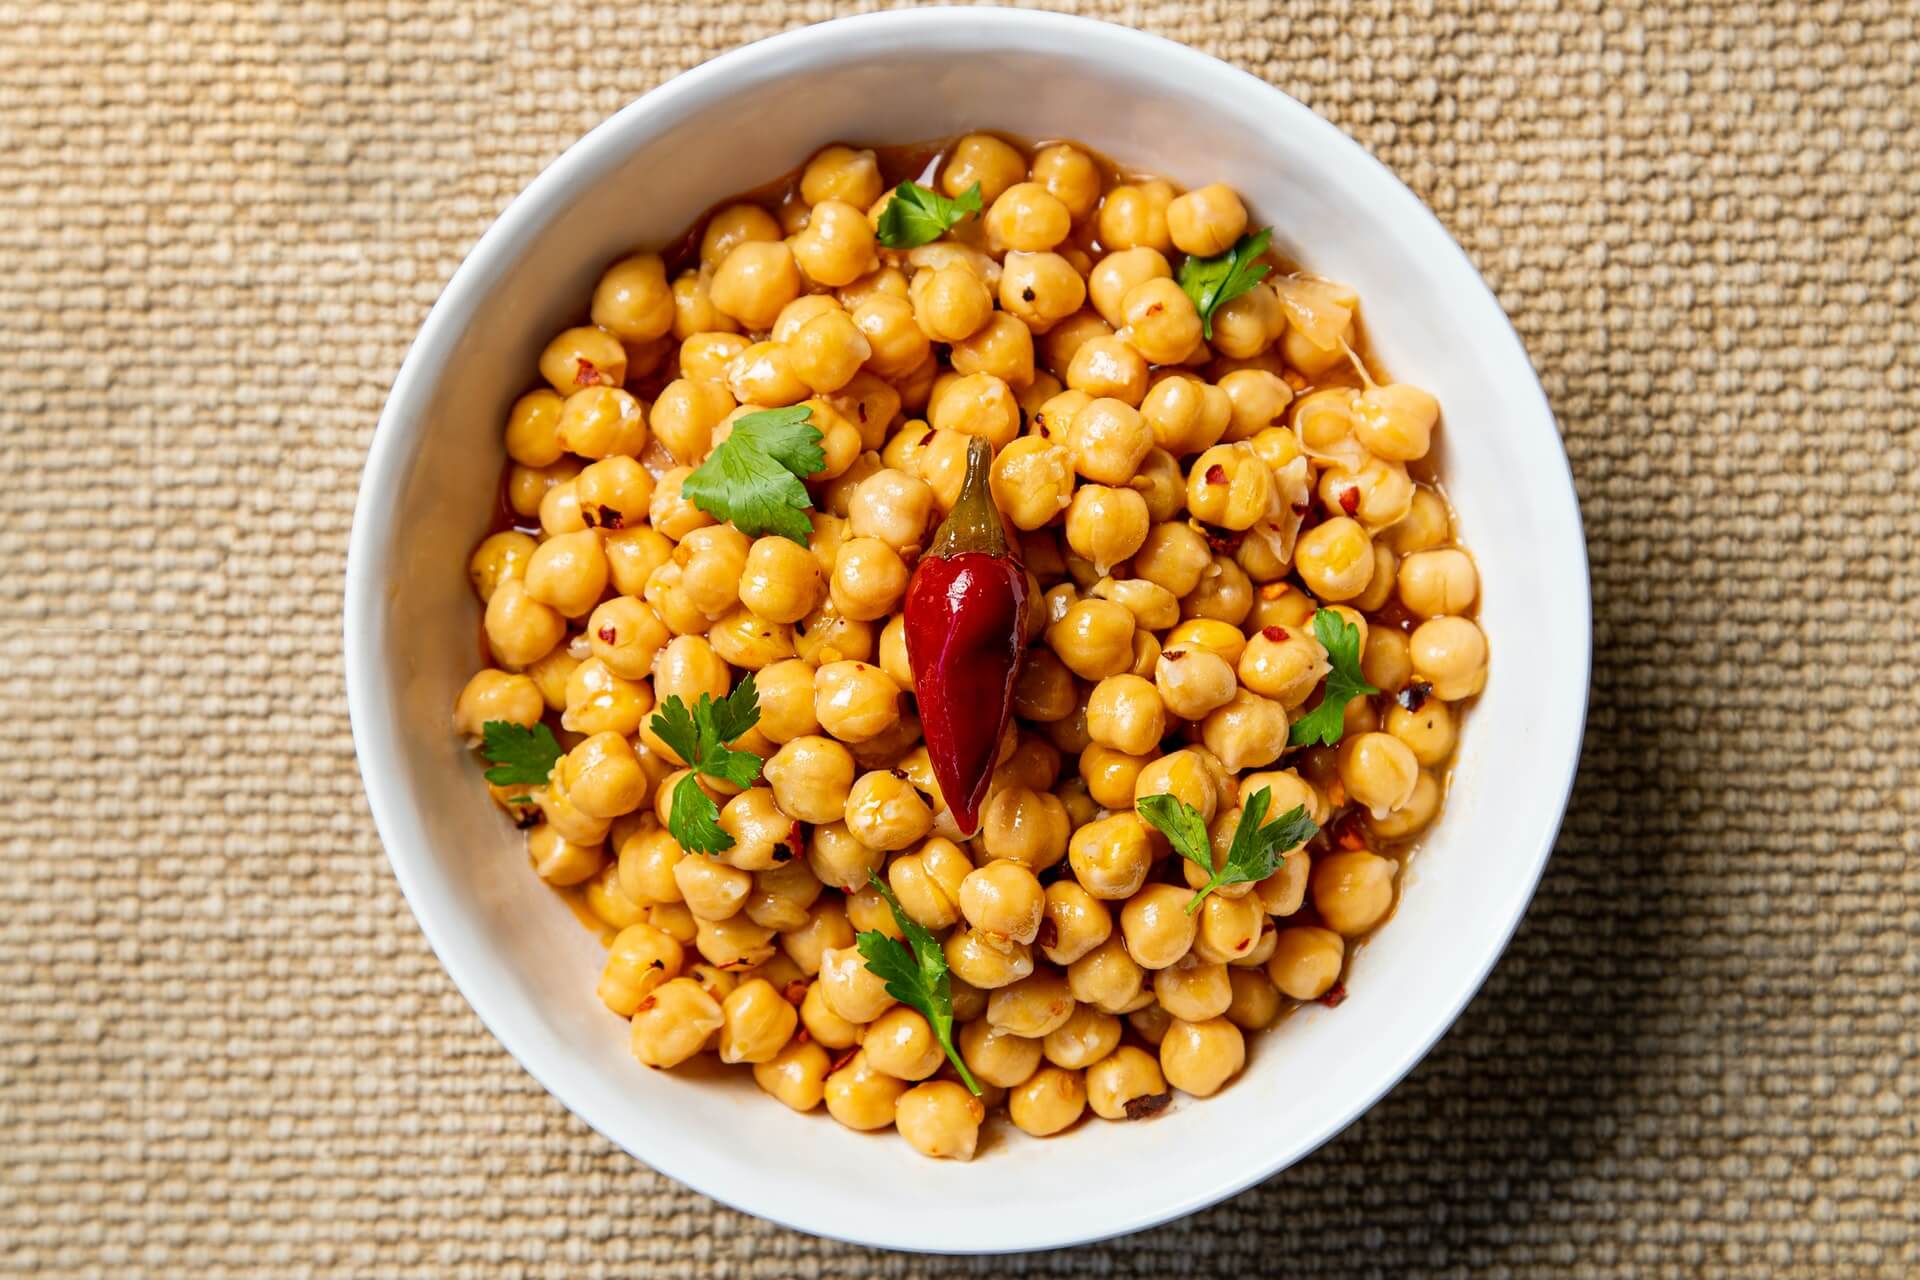 Garbanzo Beans Healthy Foods that Fill You Up Photo